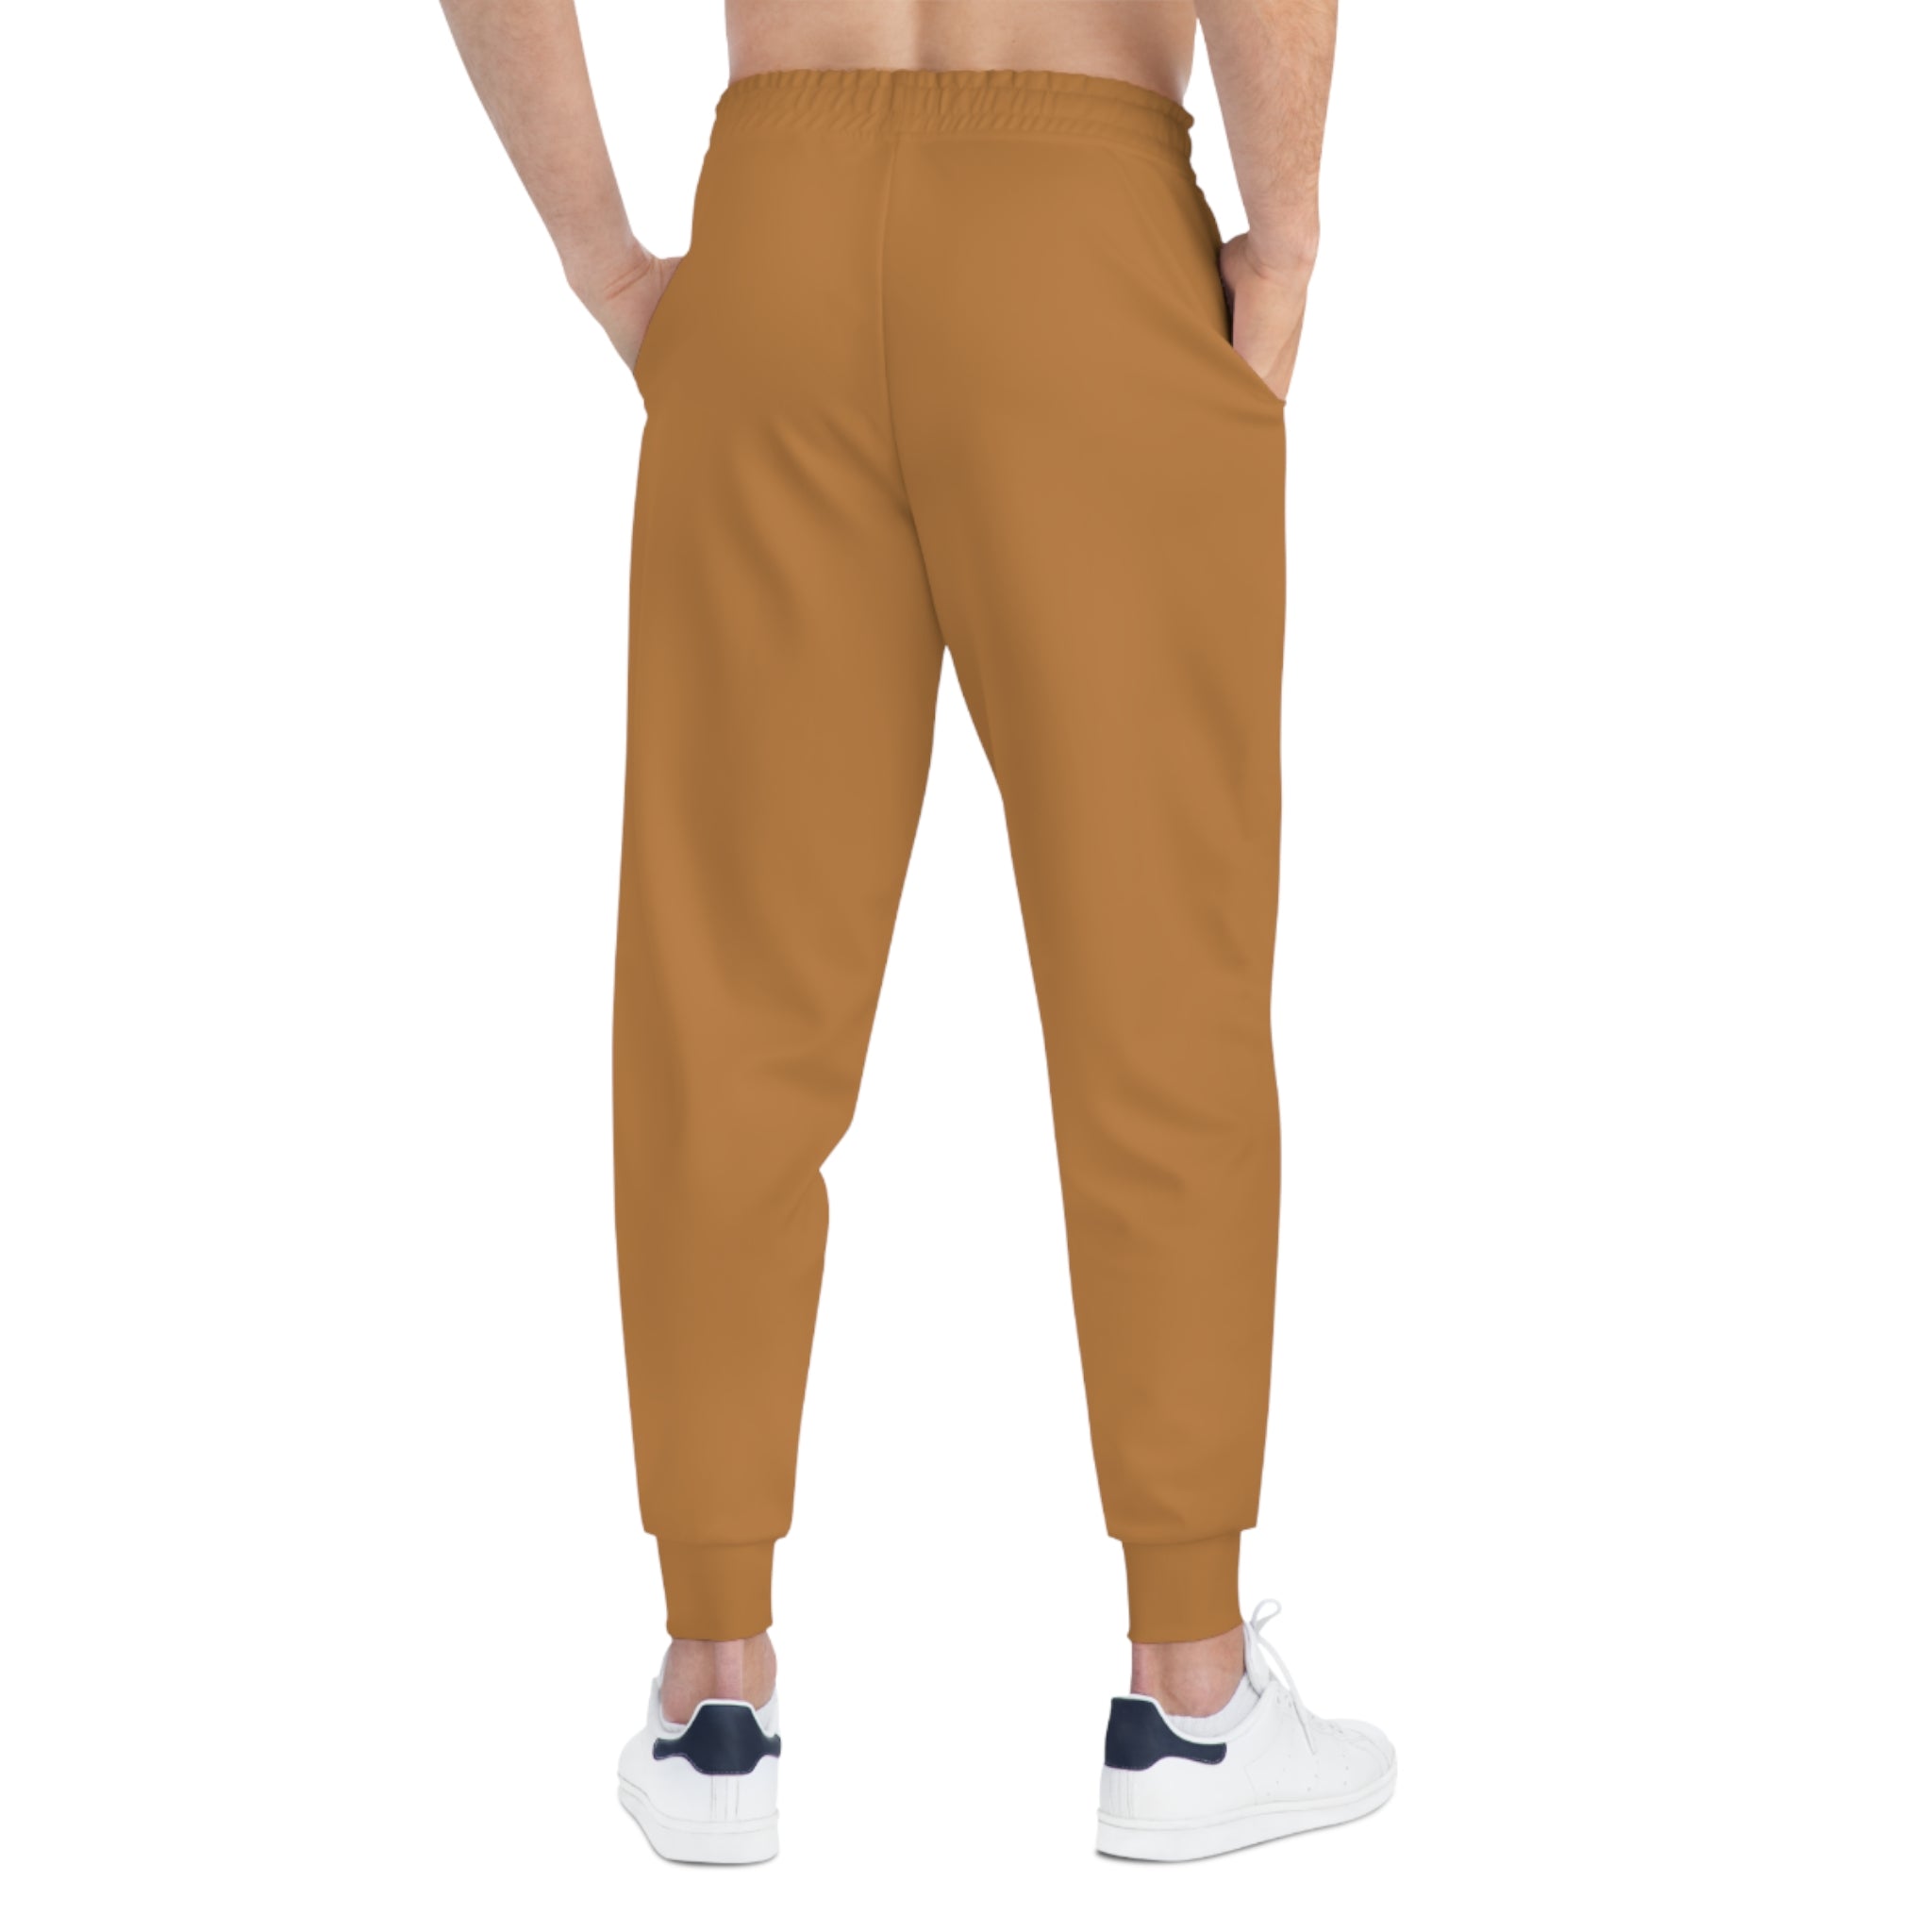 CombinedMinds Athletic Joggers Light Brown/Black Logo